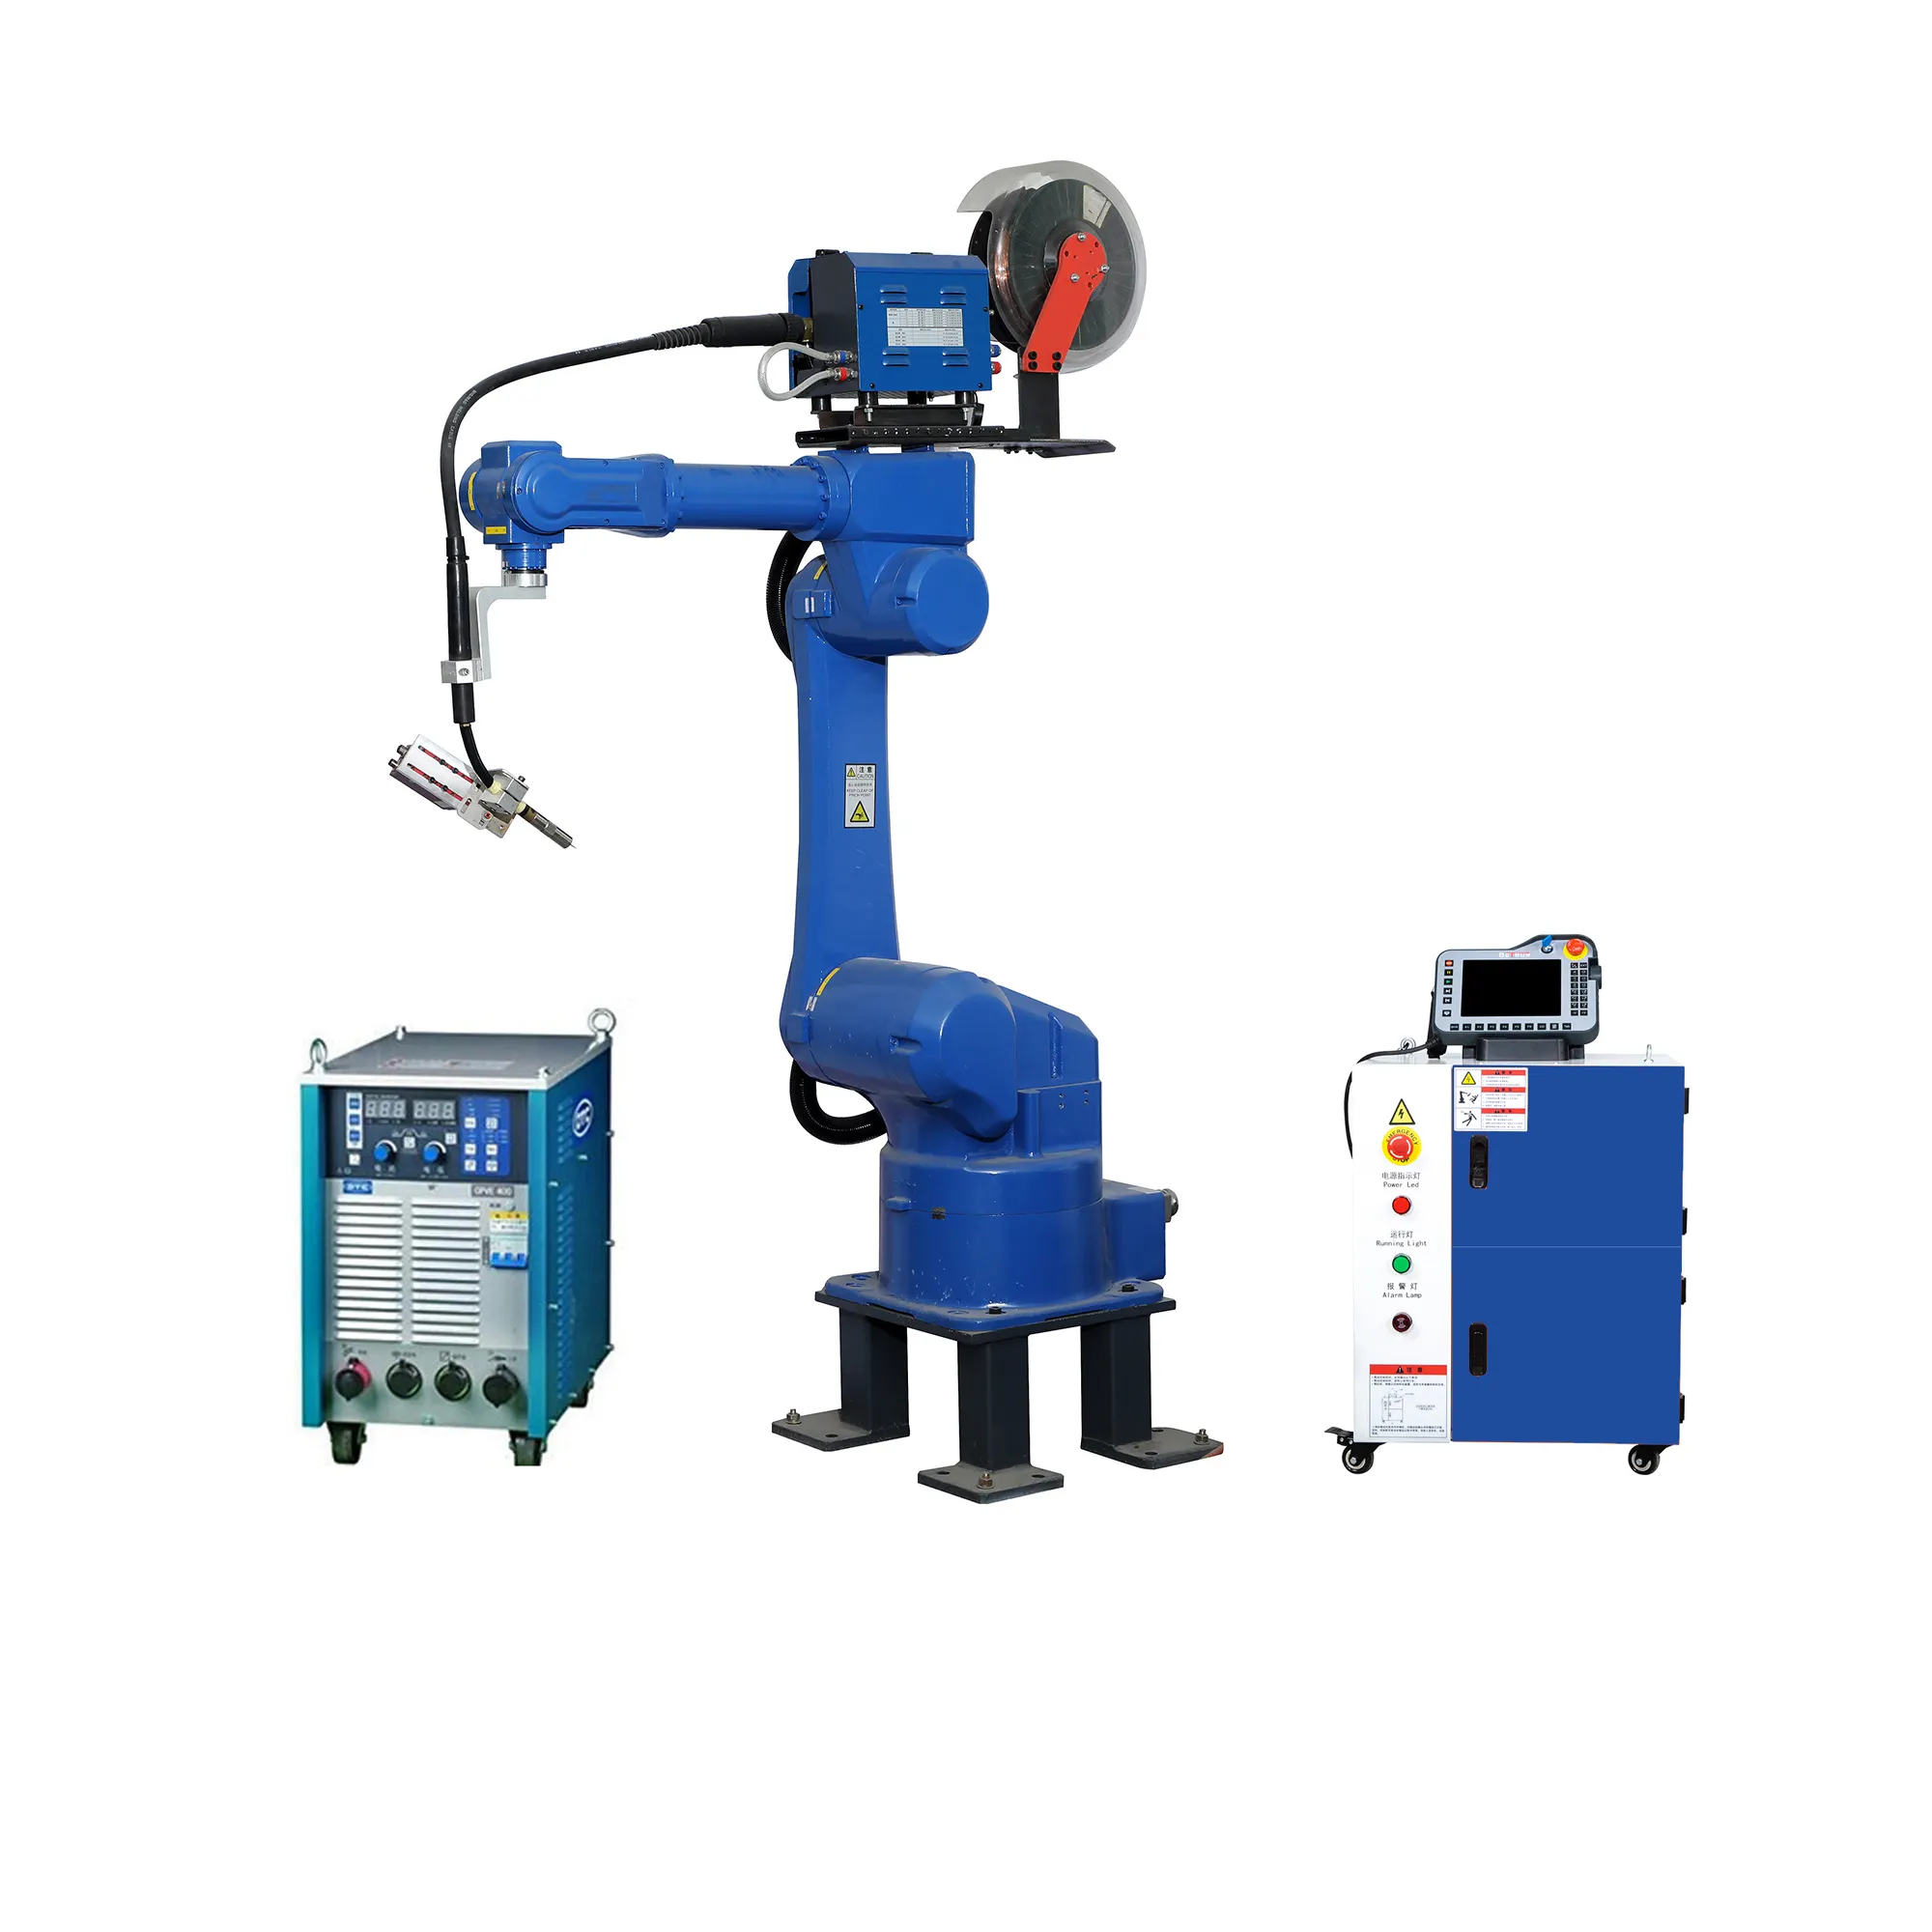 MIG Welding Robot Arm MultifunctionalSZGH Robotic Arm with 220V Voltage New Condition Core Components Incl. Motor PLC Gear